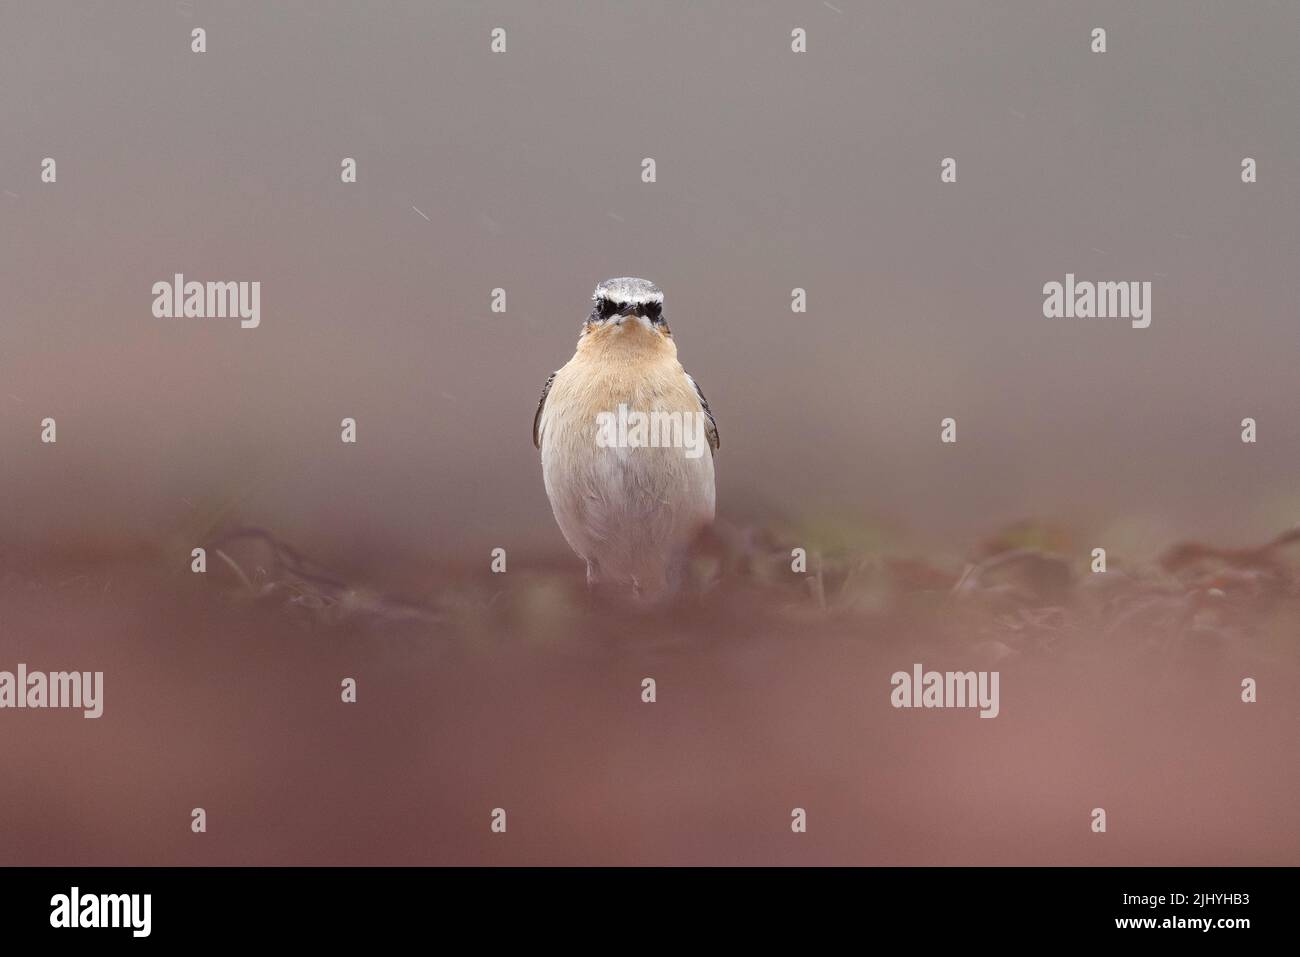 Northern Wheatear searching for food near the seashore in Applecross, Scotland. Stock Photo